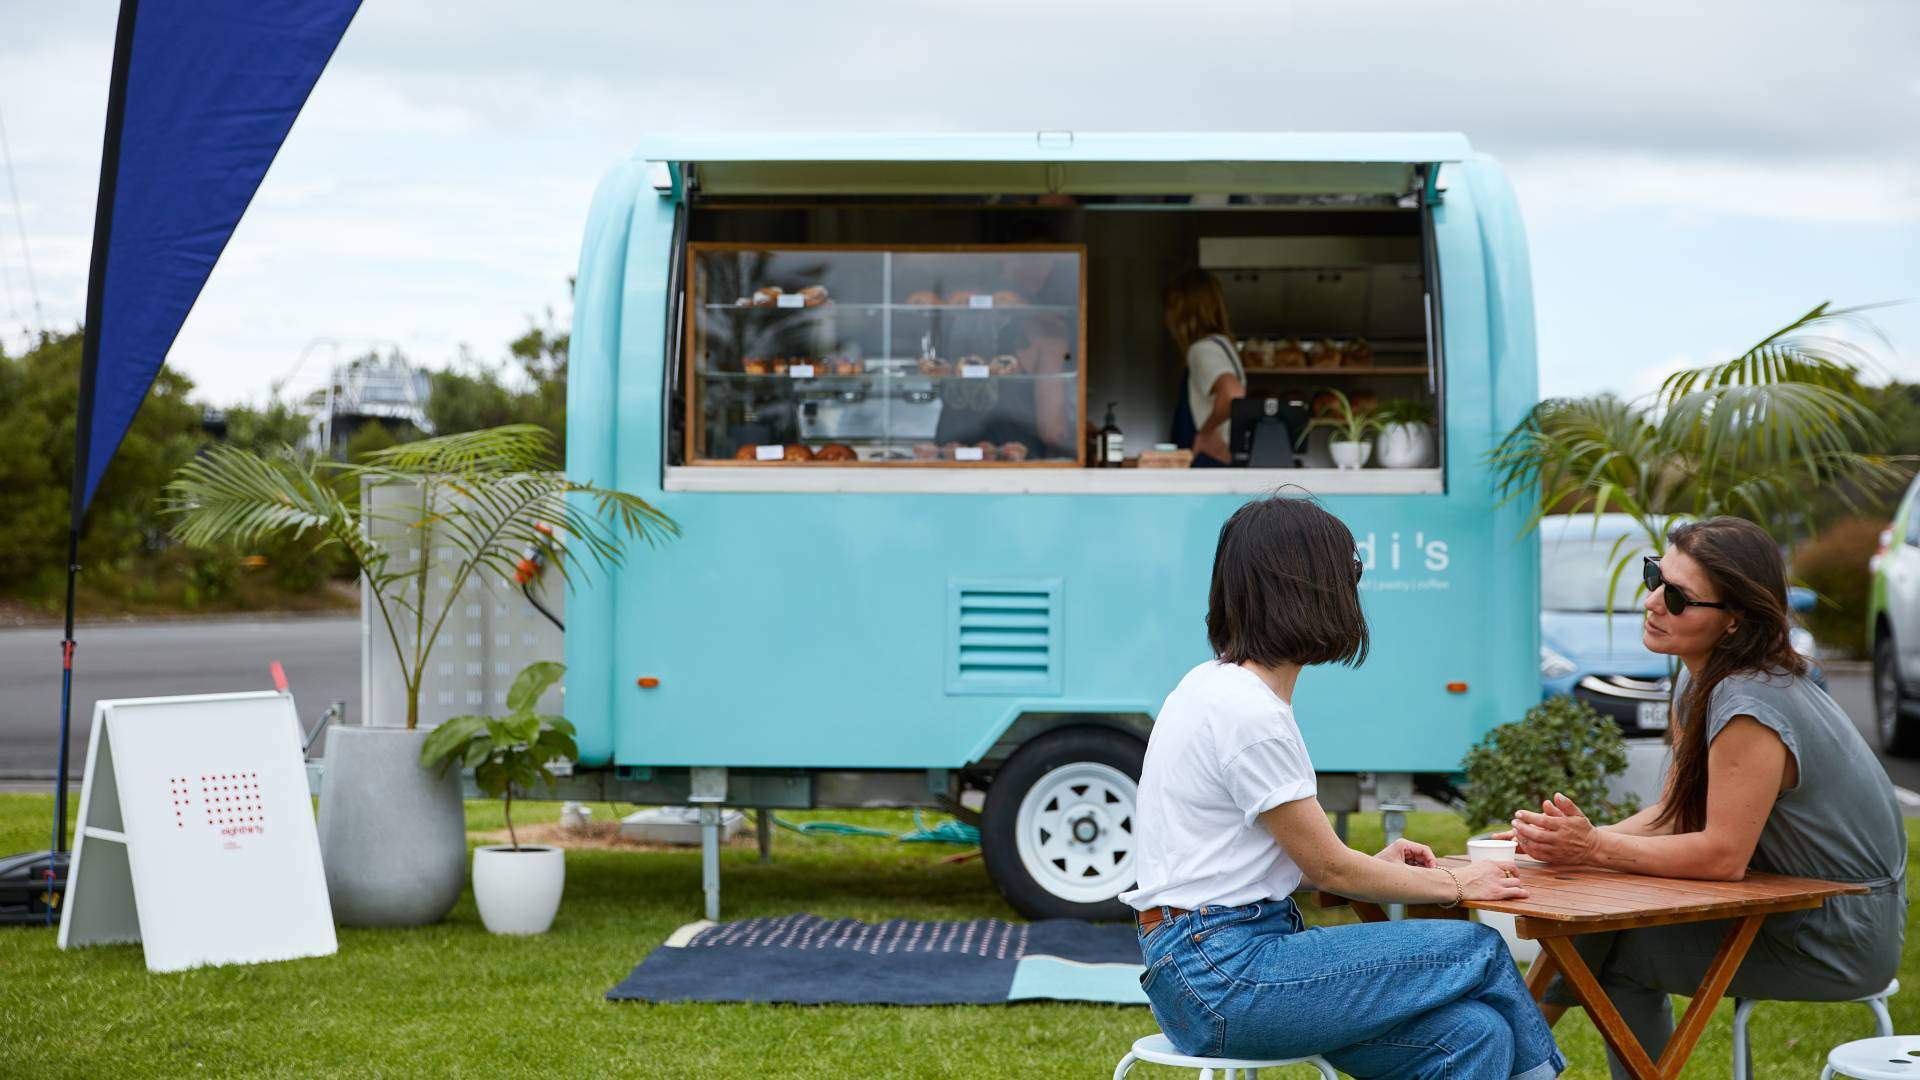 Rüdi's Bakehouse Pop-Up in Whangamata